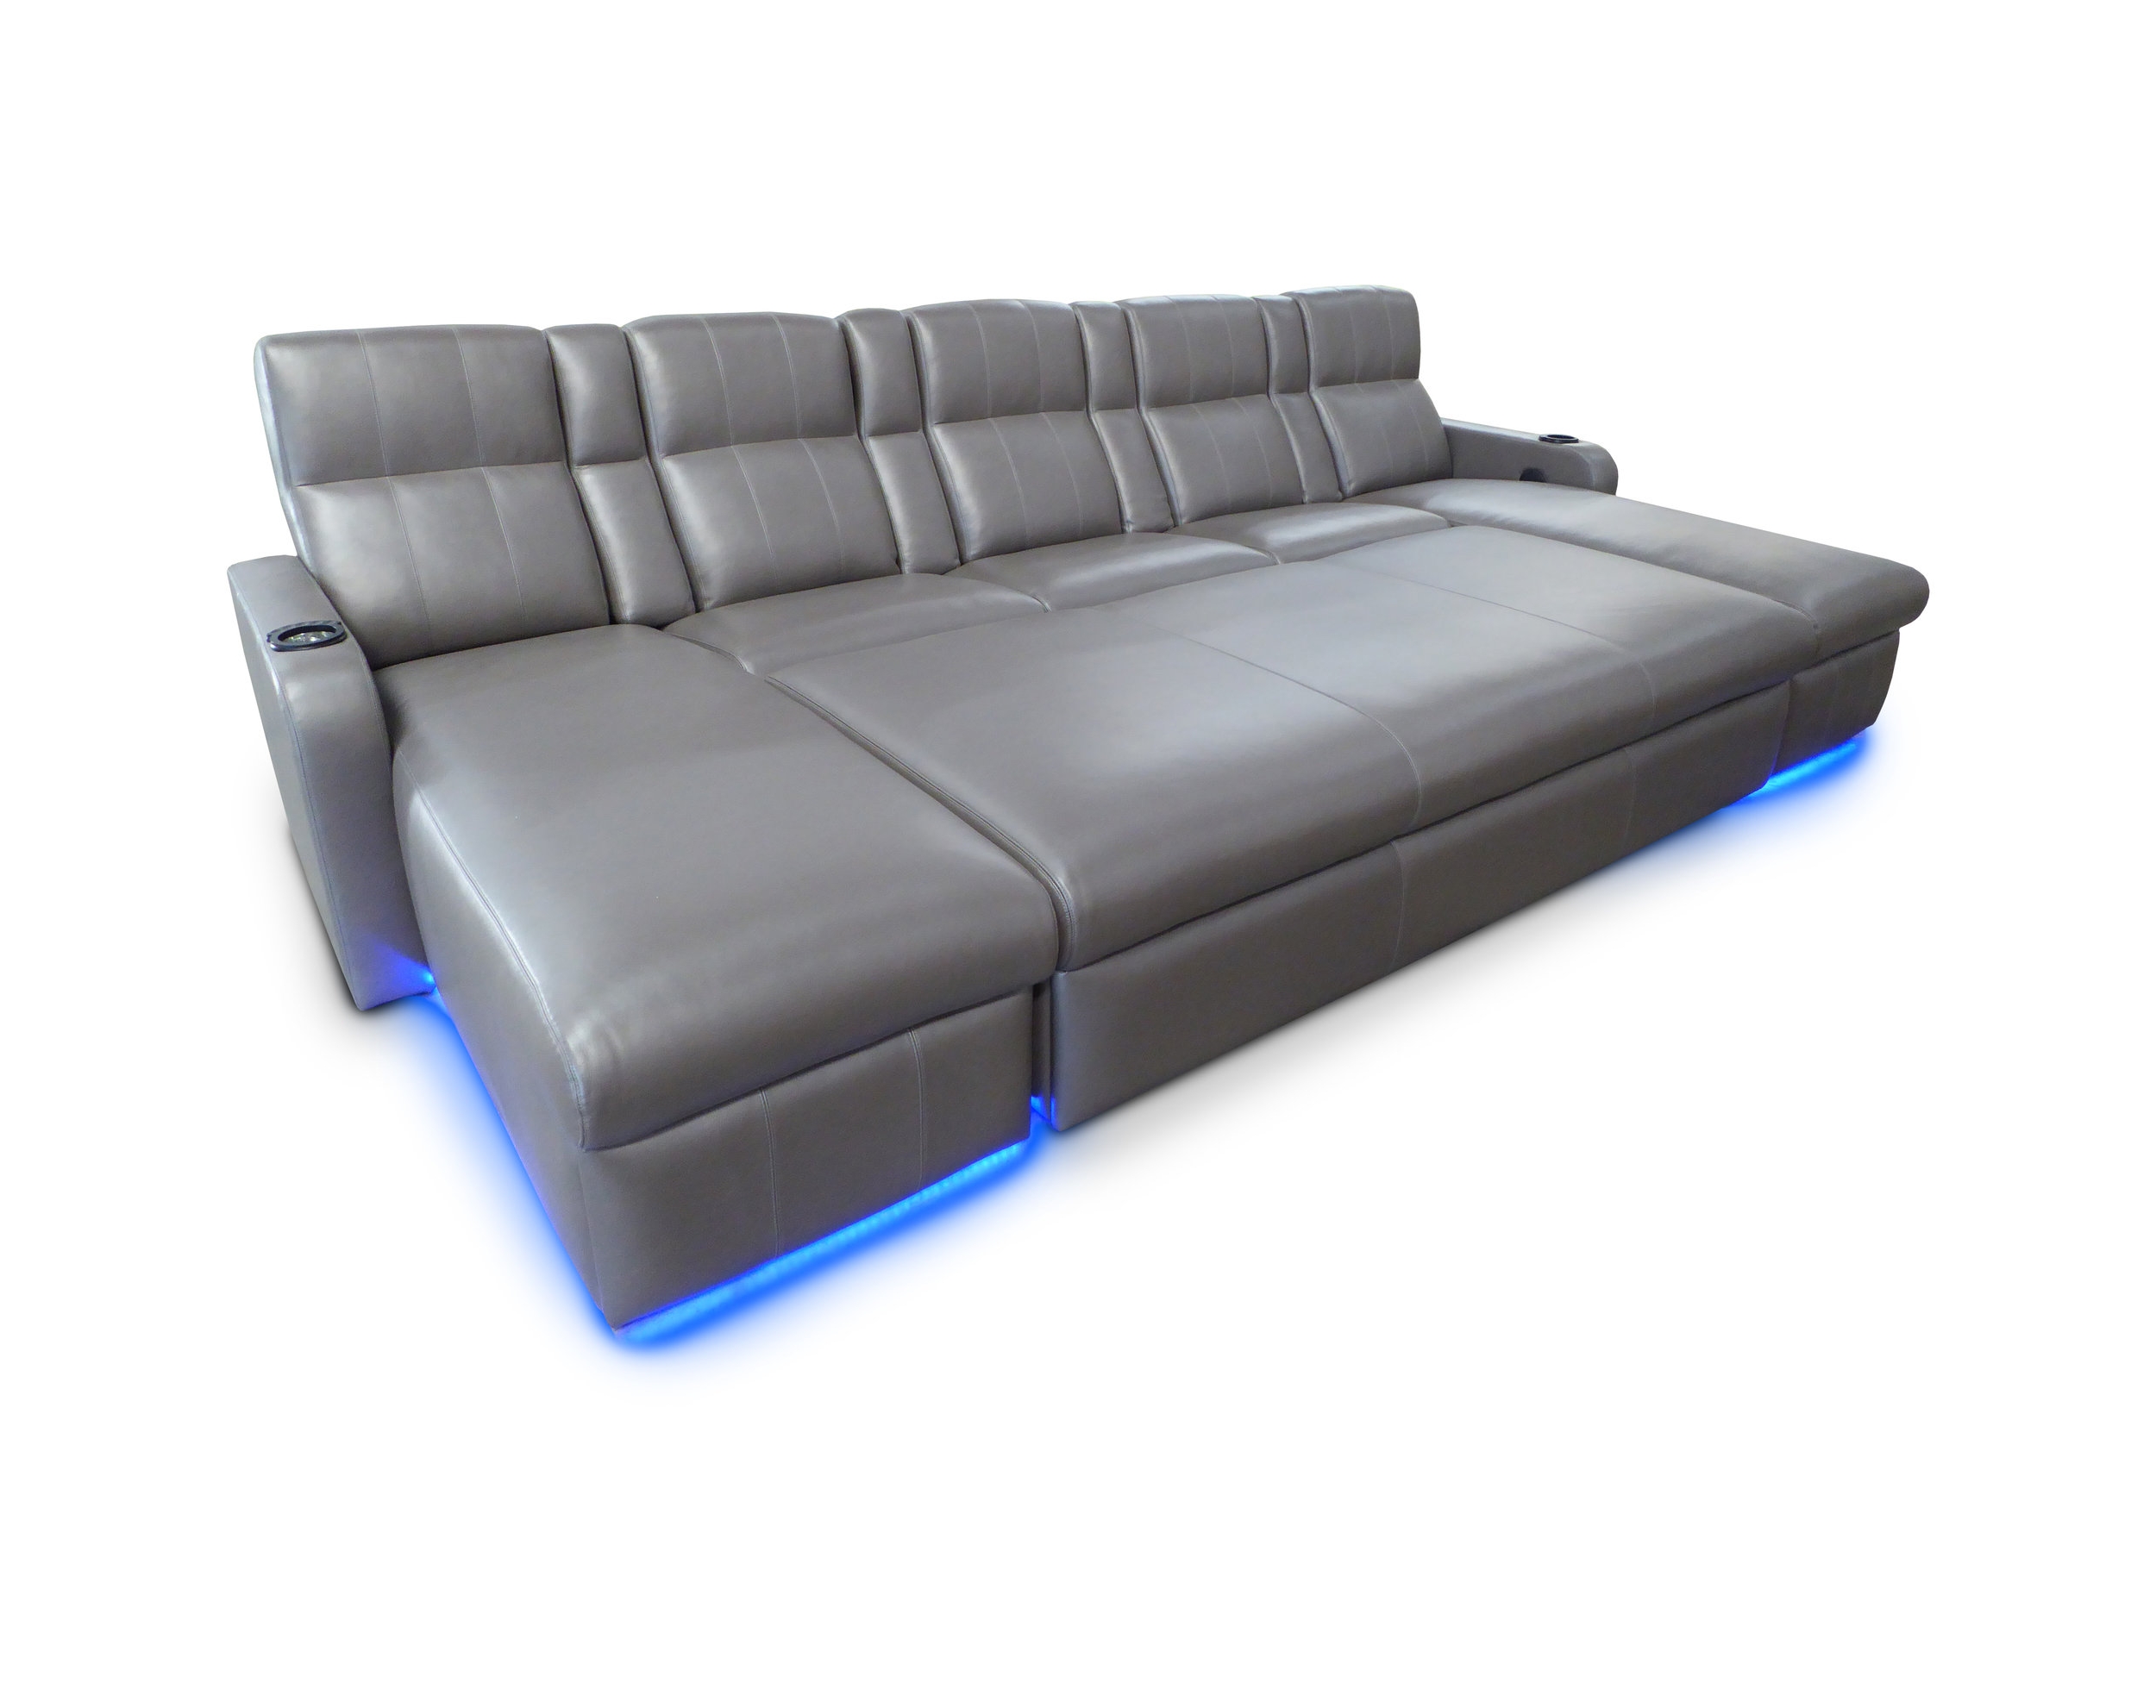  Matinee Pocket Arm Lounger; LED Floor &amp; Cup Holder Lighting;&nbsp; Ottoman on Casters 